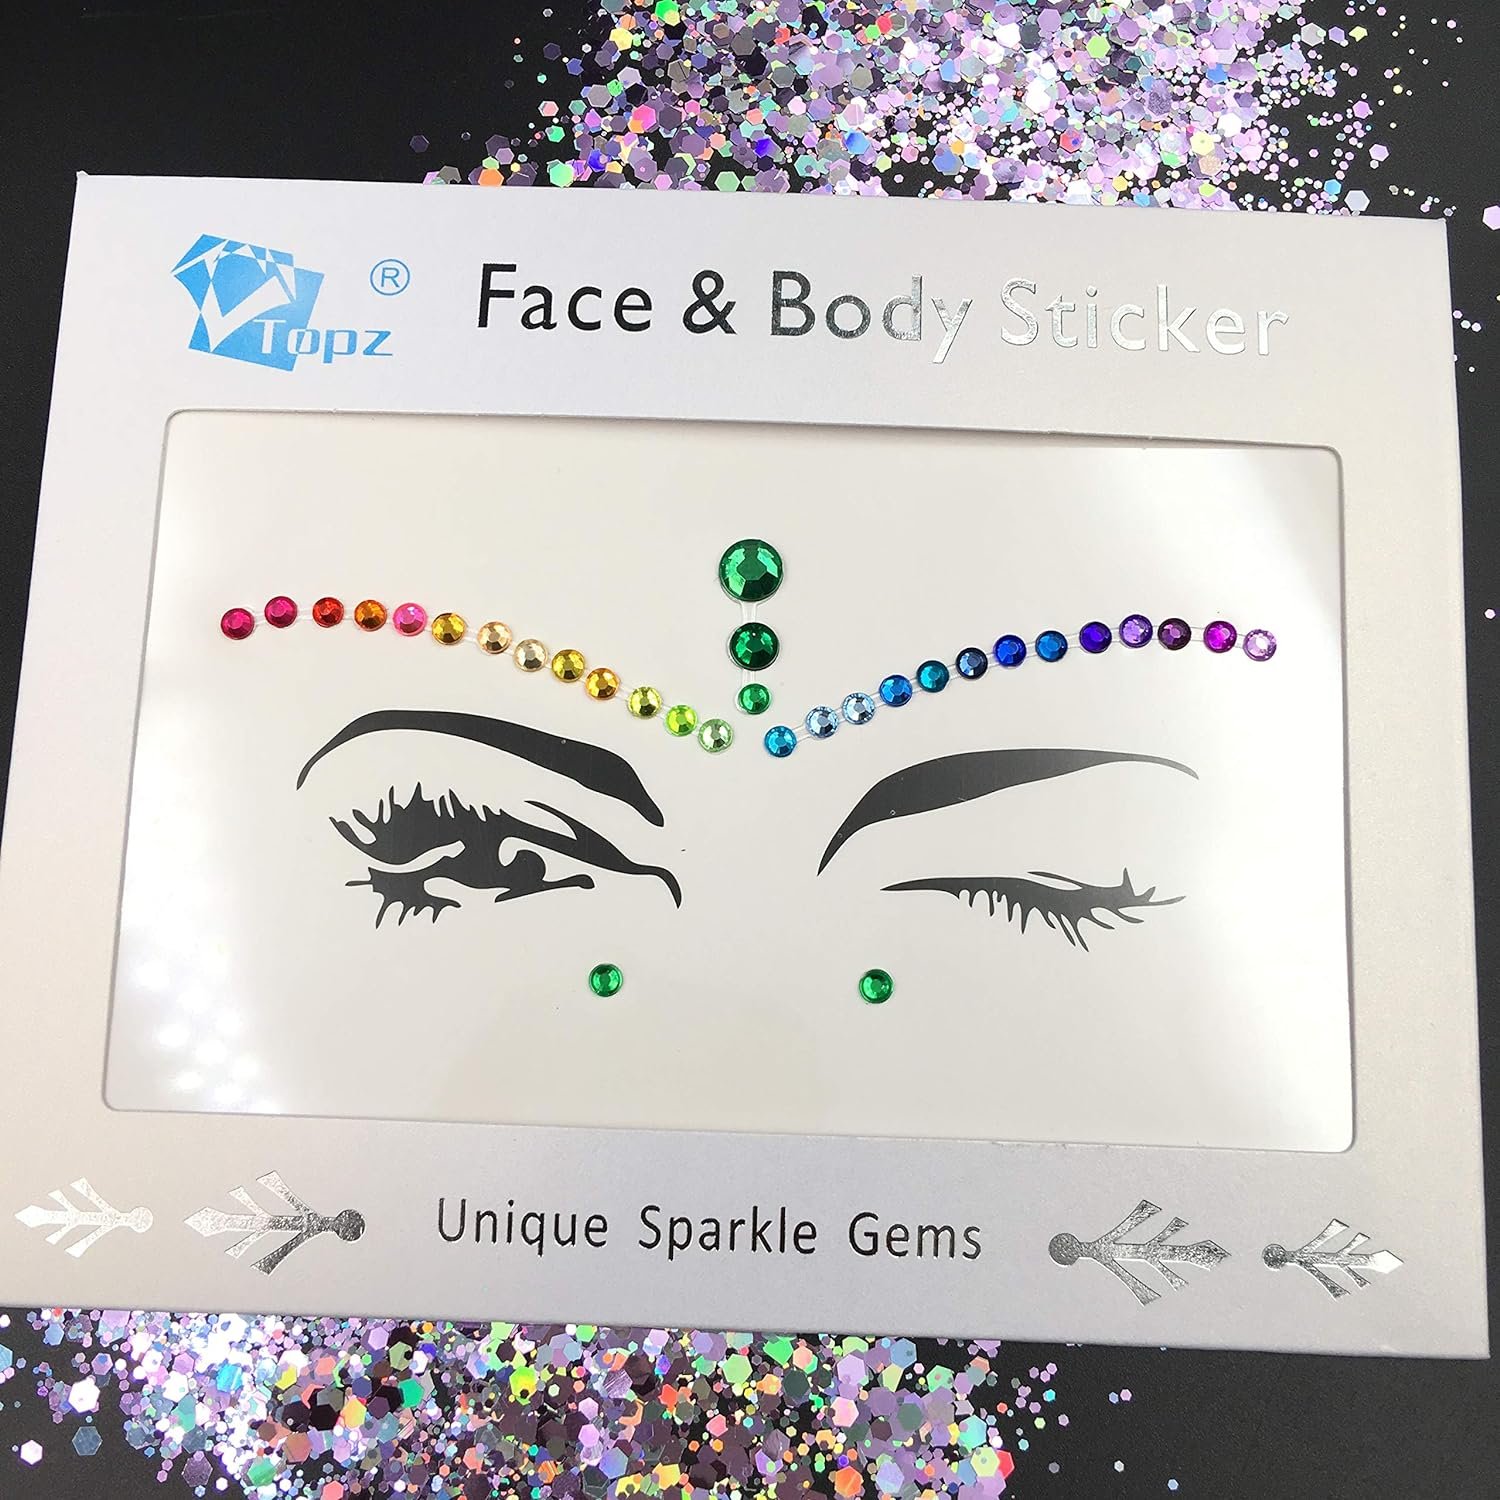 rainbow face gems festival halloween face jewels crystals bindi body jewels temporary tattoo face jewel stickers for festival pride makeup .jpg